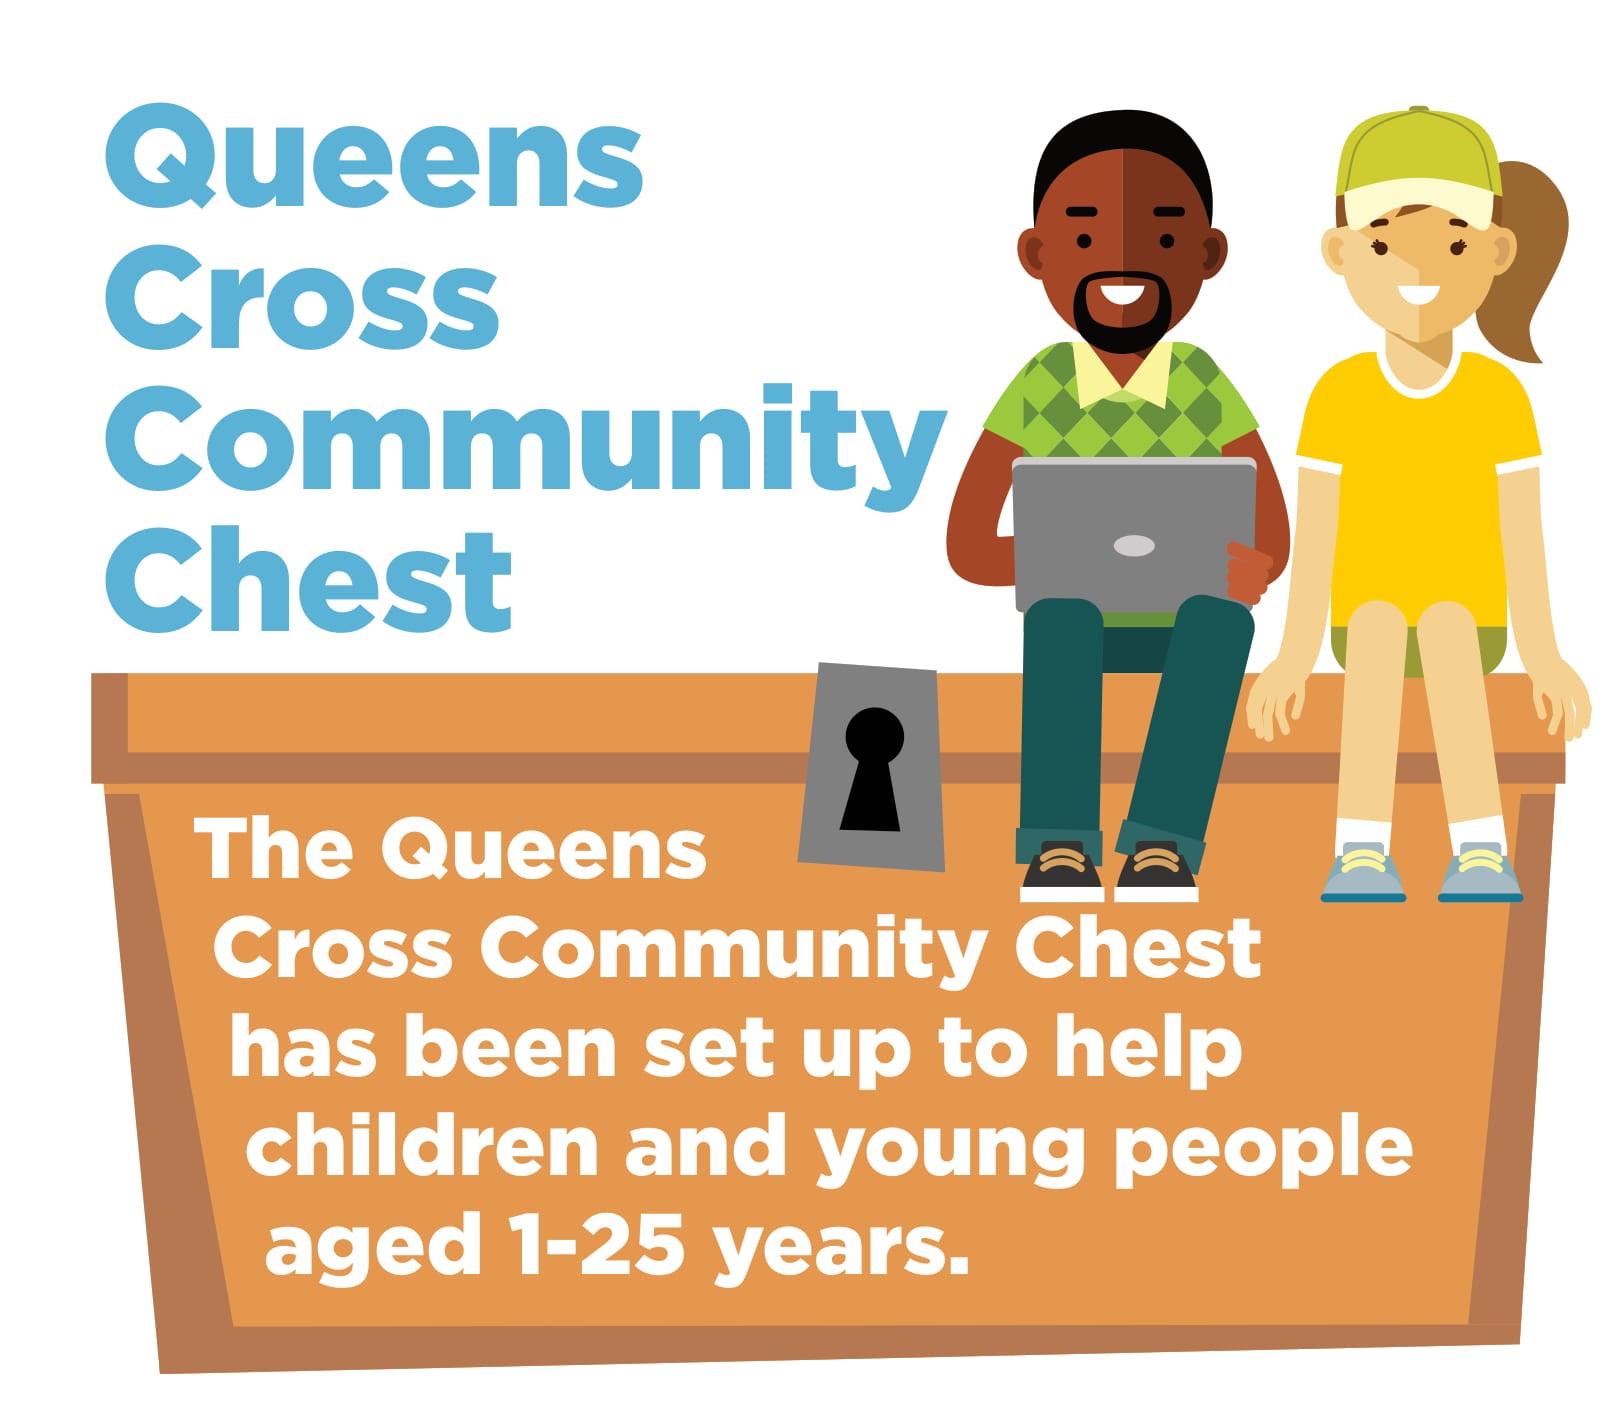 Queens Cross encourages young people to apply for Community Chest fund